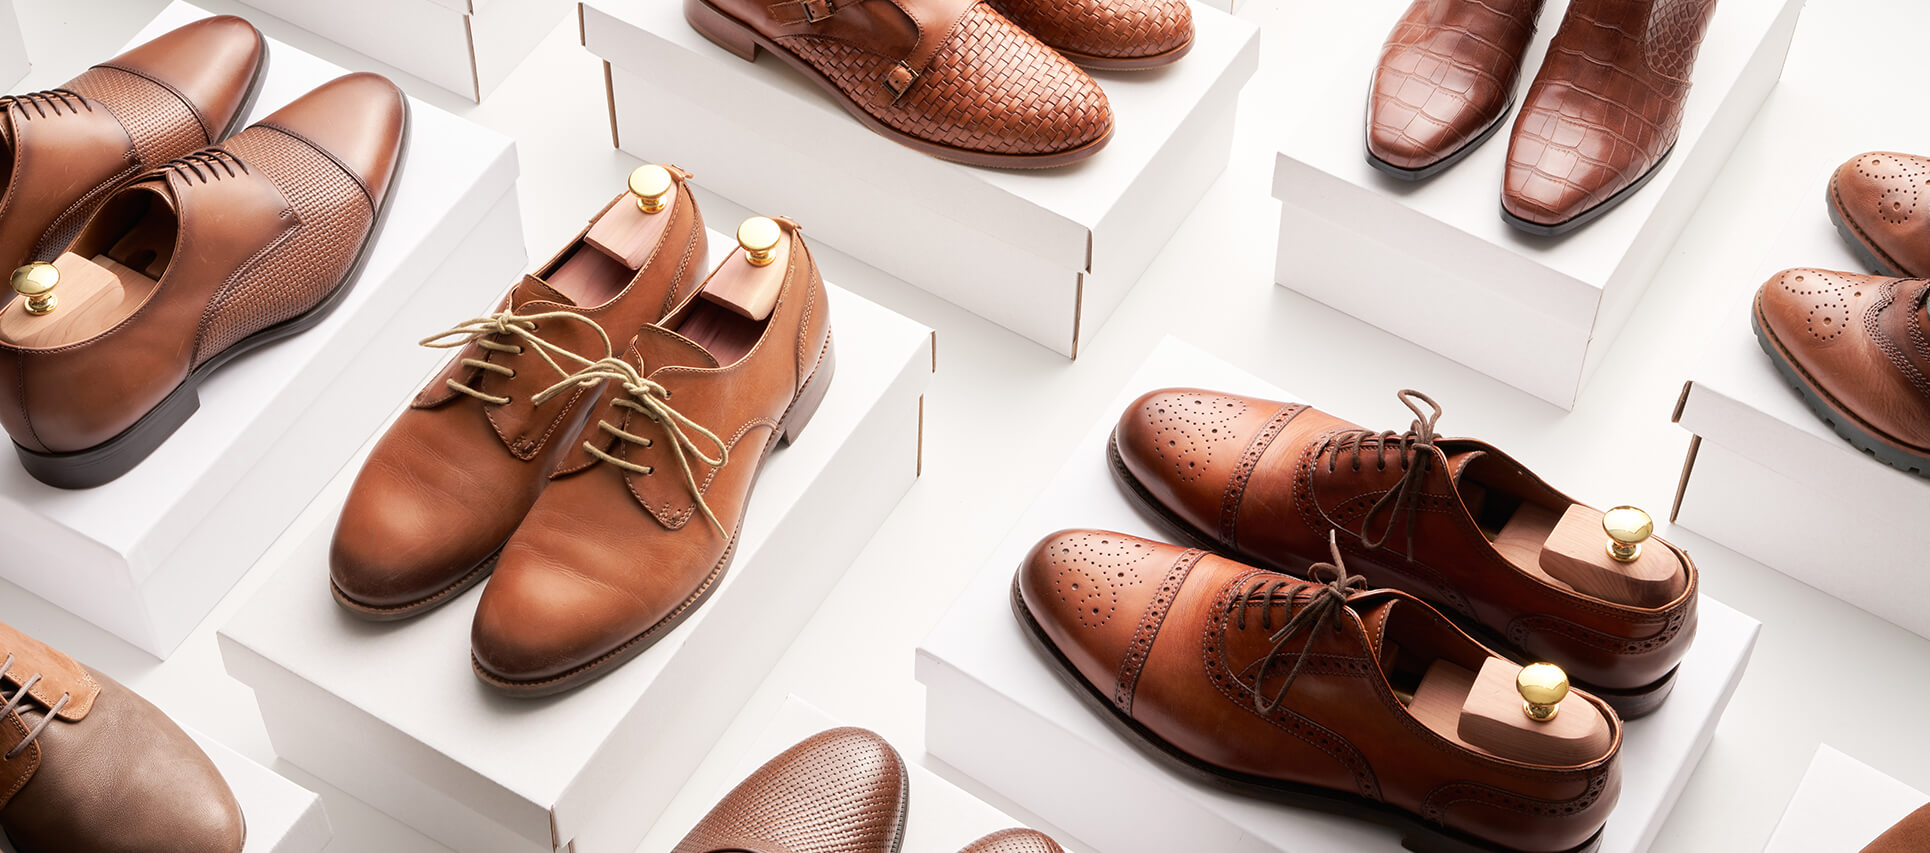 Clarks Outlet - Gloucester - Up to 70% off all day, everyday